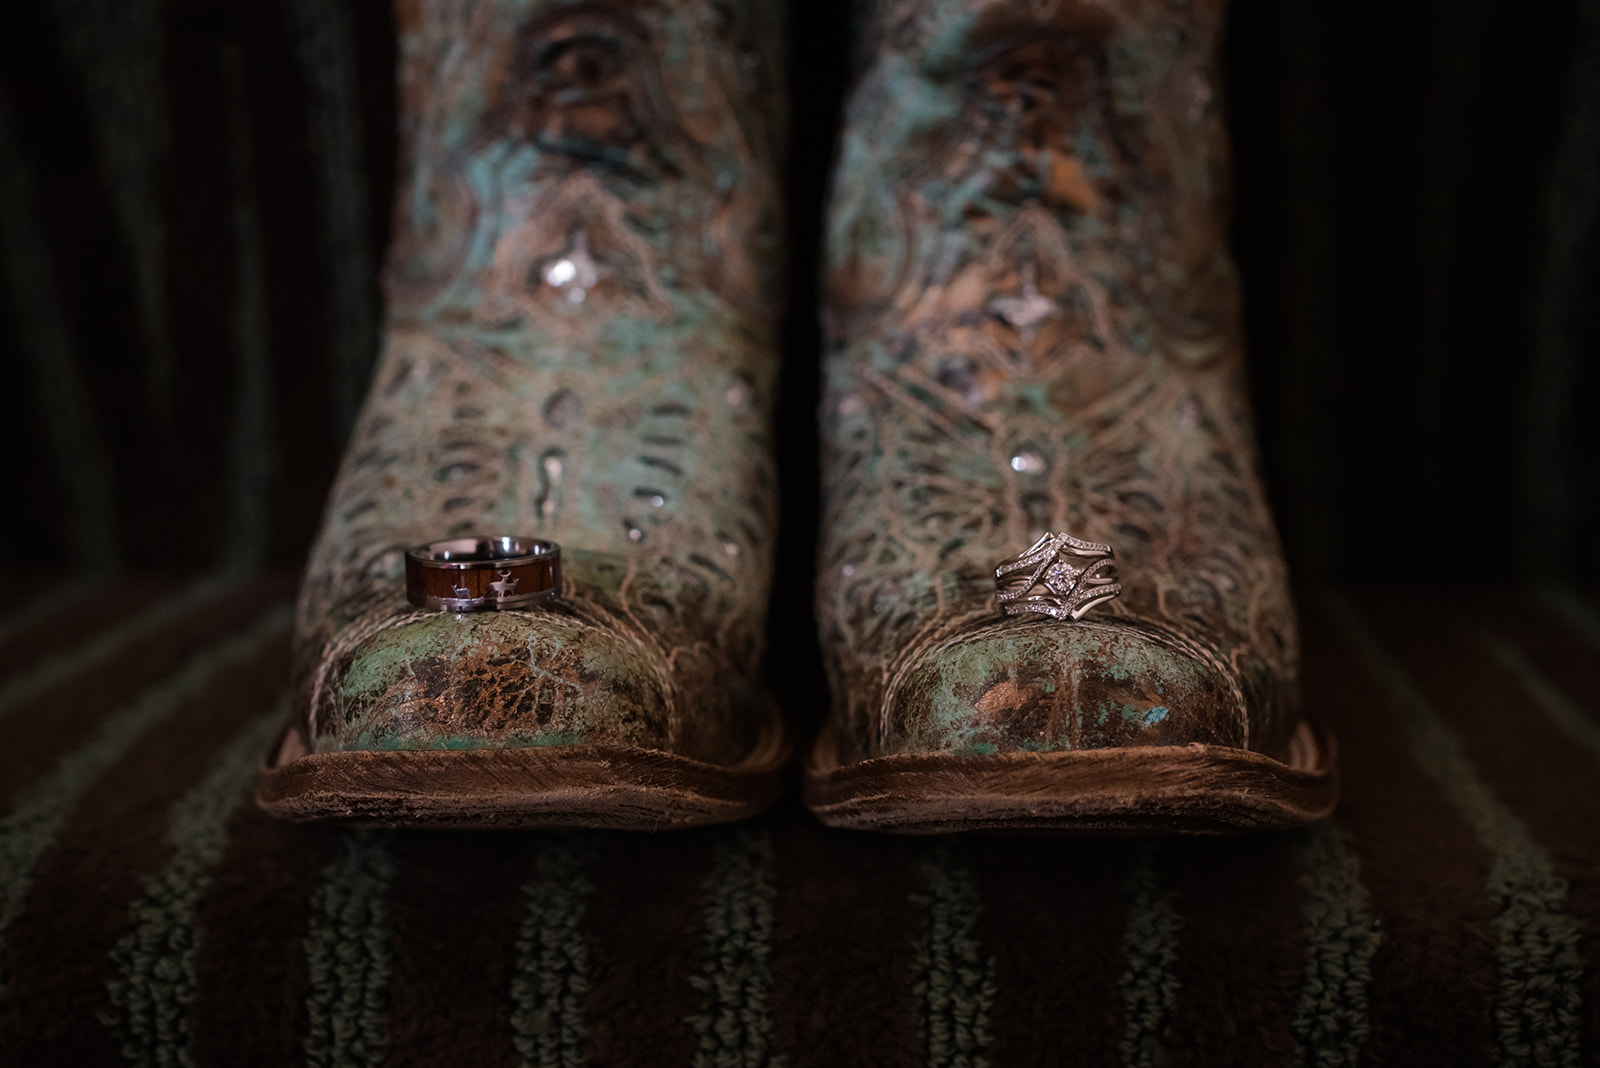 custom rings sit on the toe of the bride's sparkly cowgirl boot